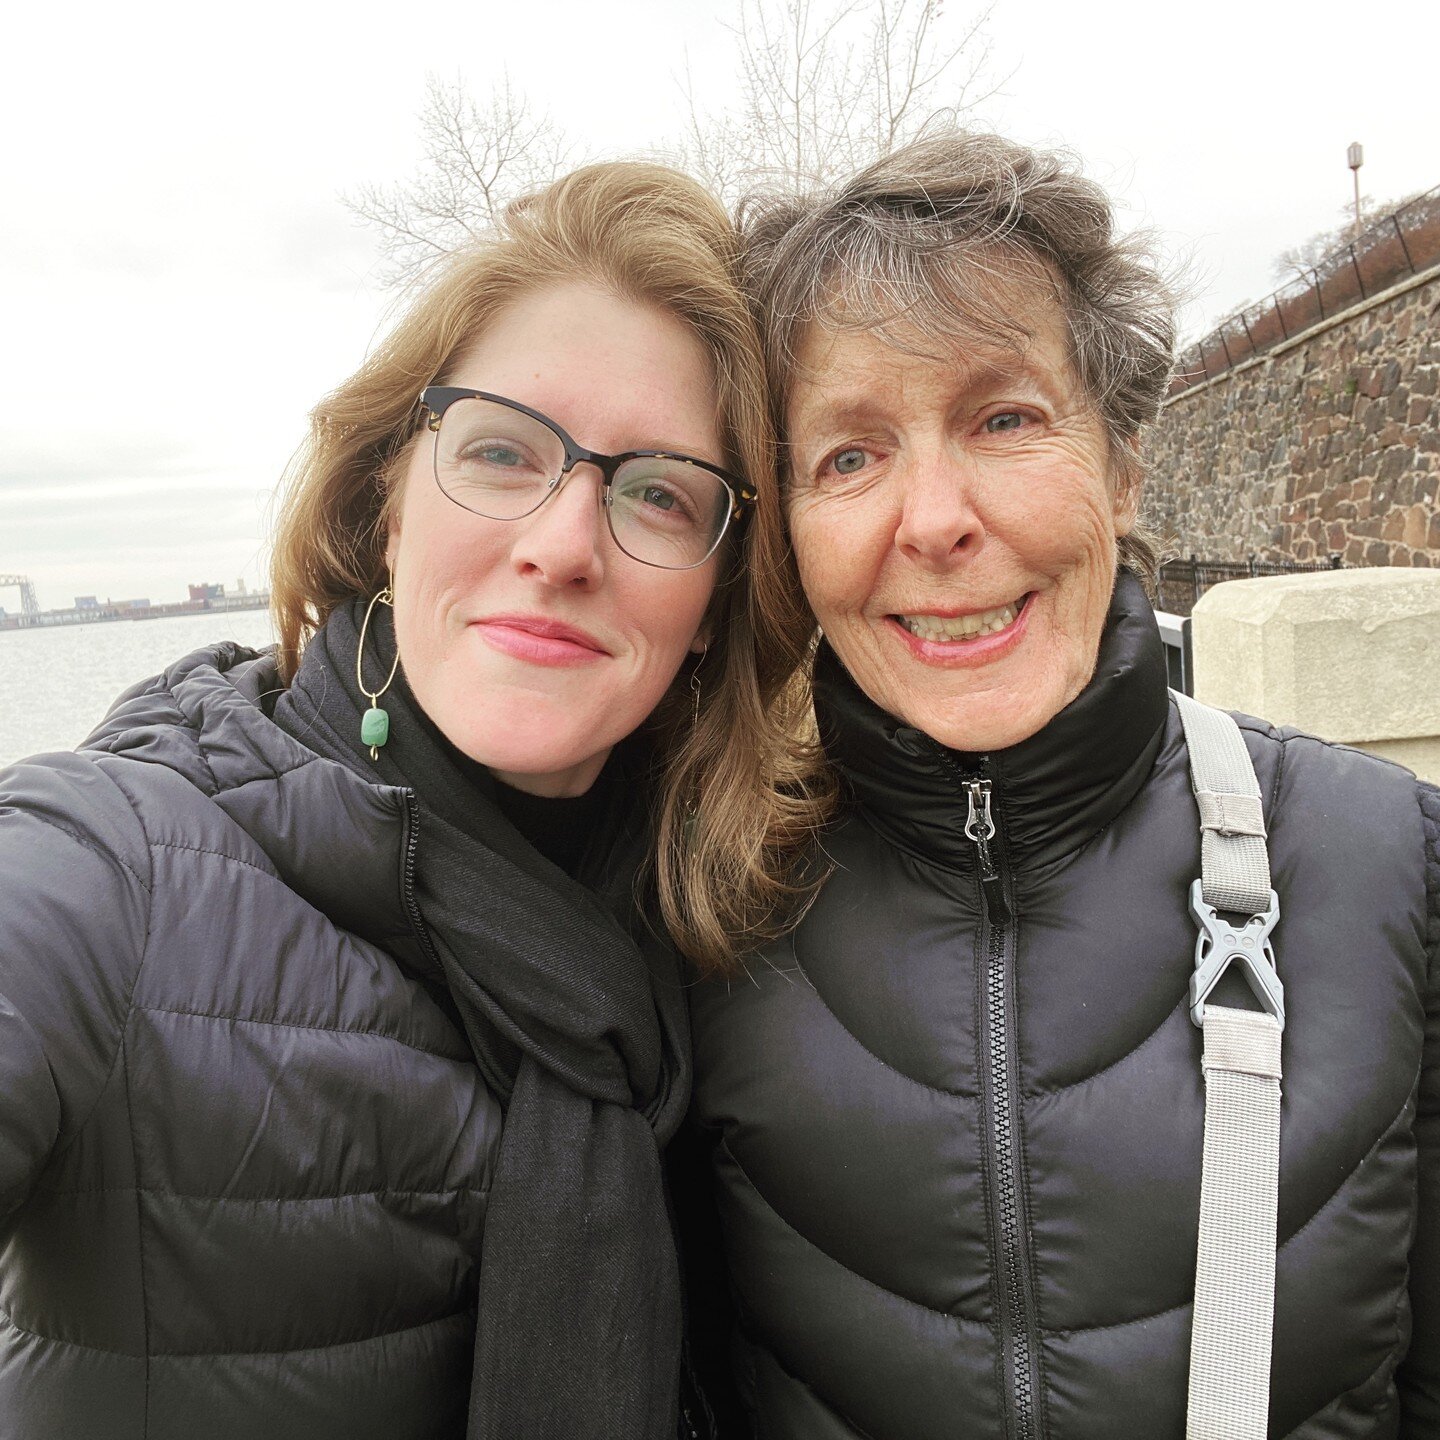 If you know me, you likely know of my beautiful mother, Sharon/The Zen Momma.

More than 15 years ago, she was diagnosed with Parkinson's disease. Parkinson's snatches years from your physical body, at a rate much faster than &quot;normal time.&quot;